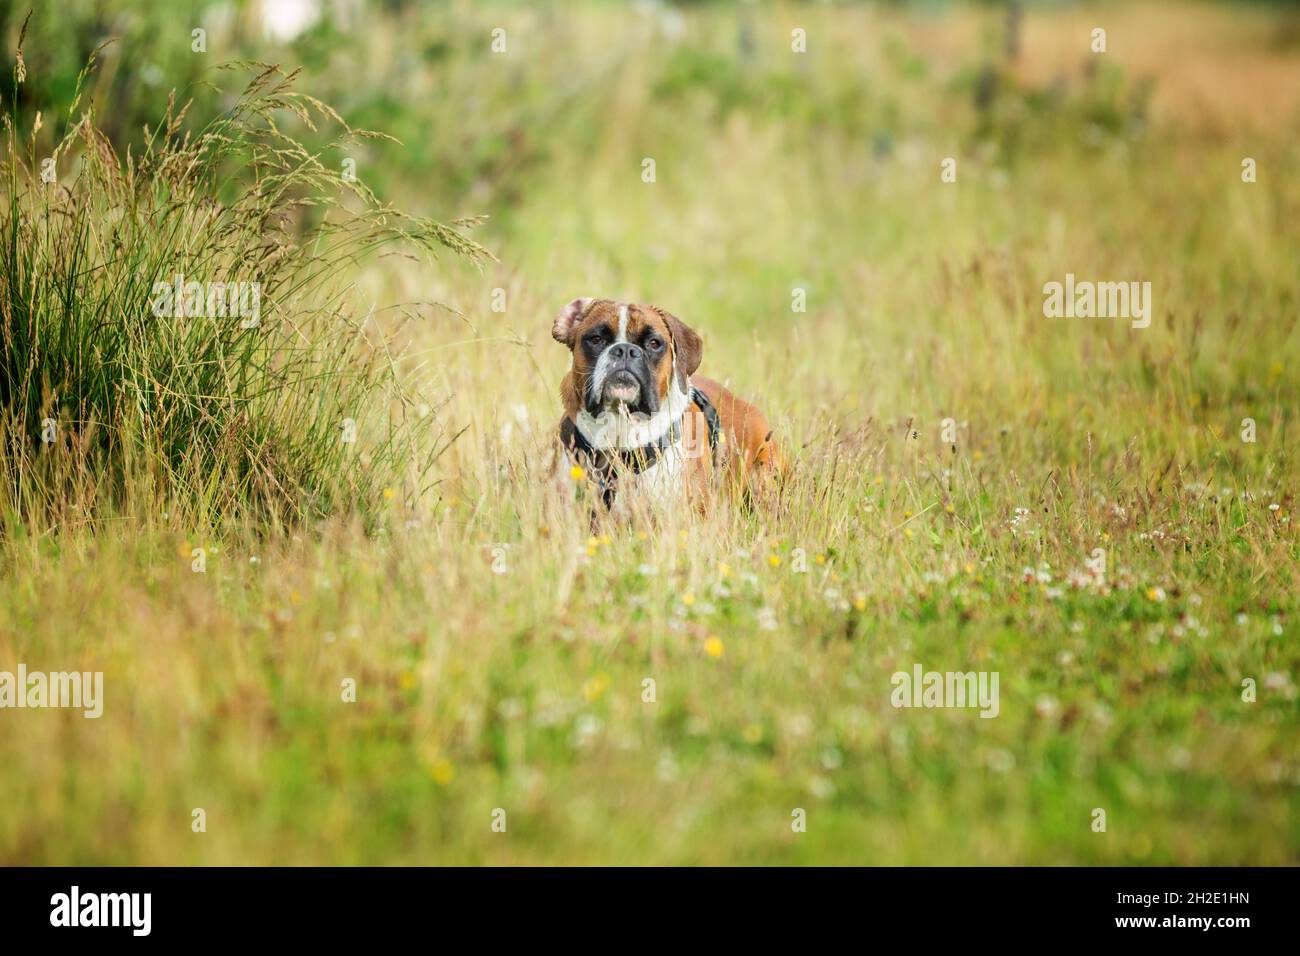 Brown black white Boxer dog lying in grass looking at the photographer surrounds with blurred foreground and background in the center of the image Stock Photo